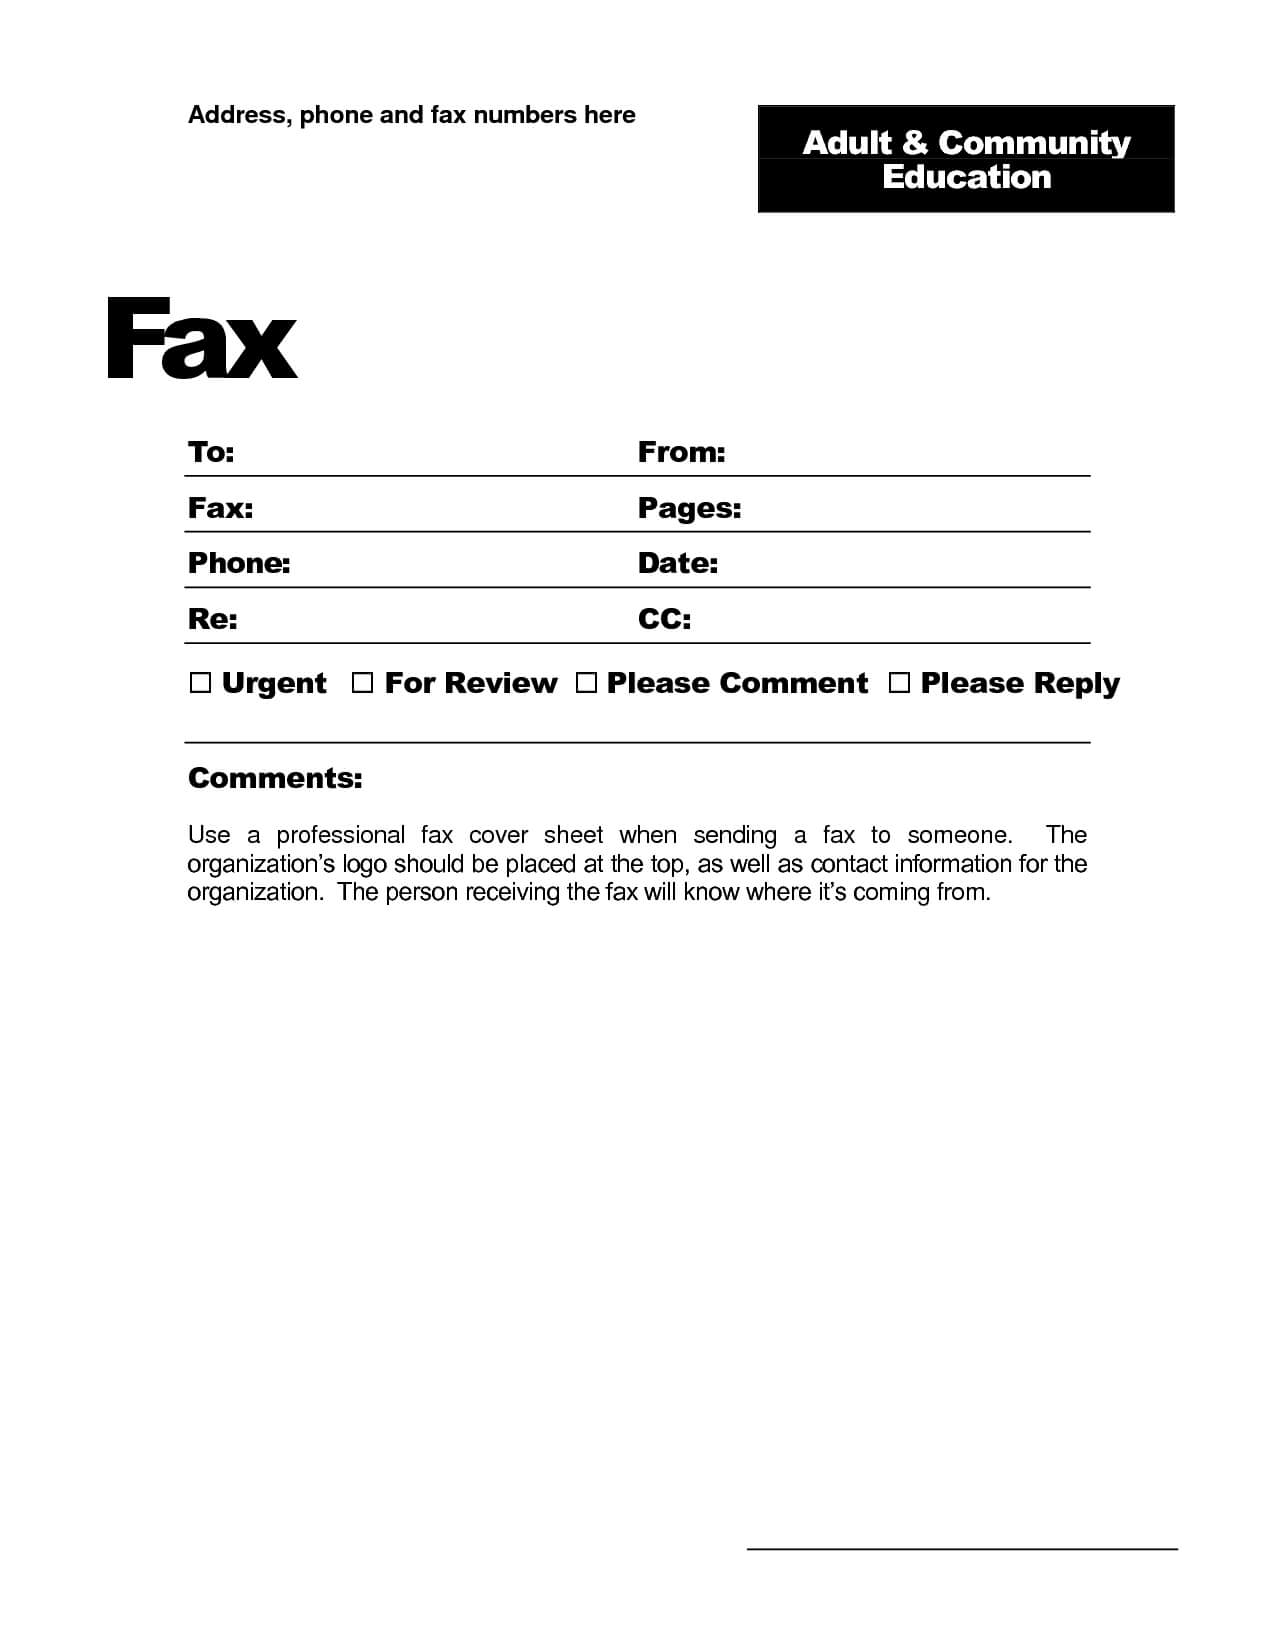 Fax Template Word 2010 - Free Download For Fax Cover Sheet Template Word 2010